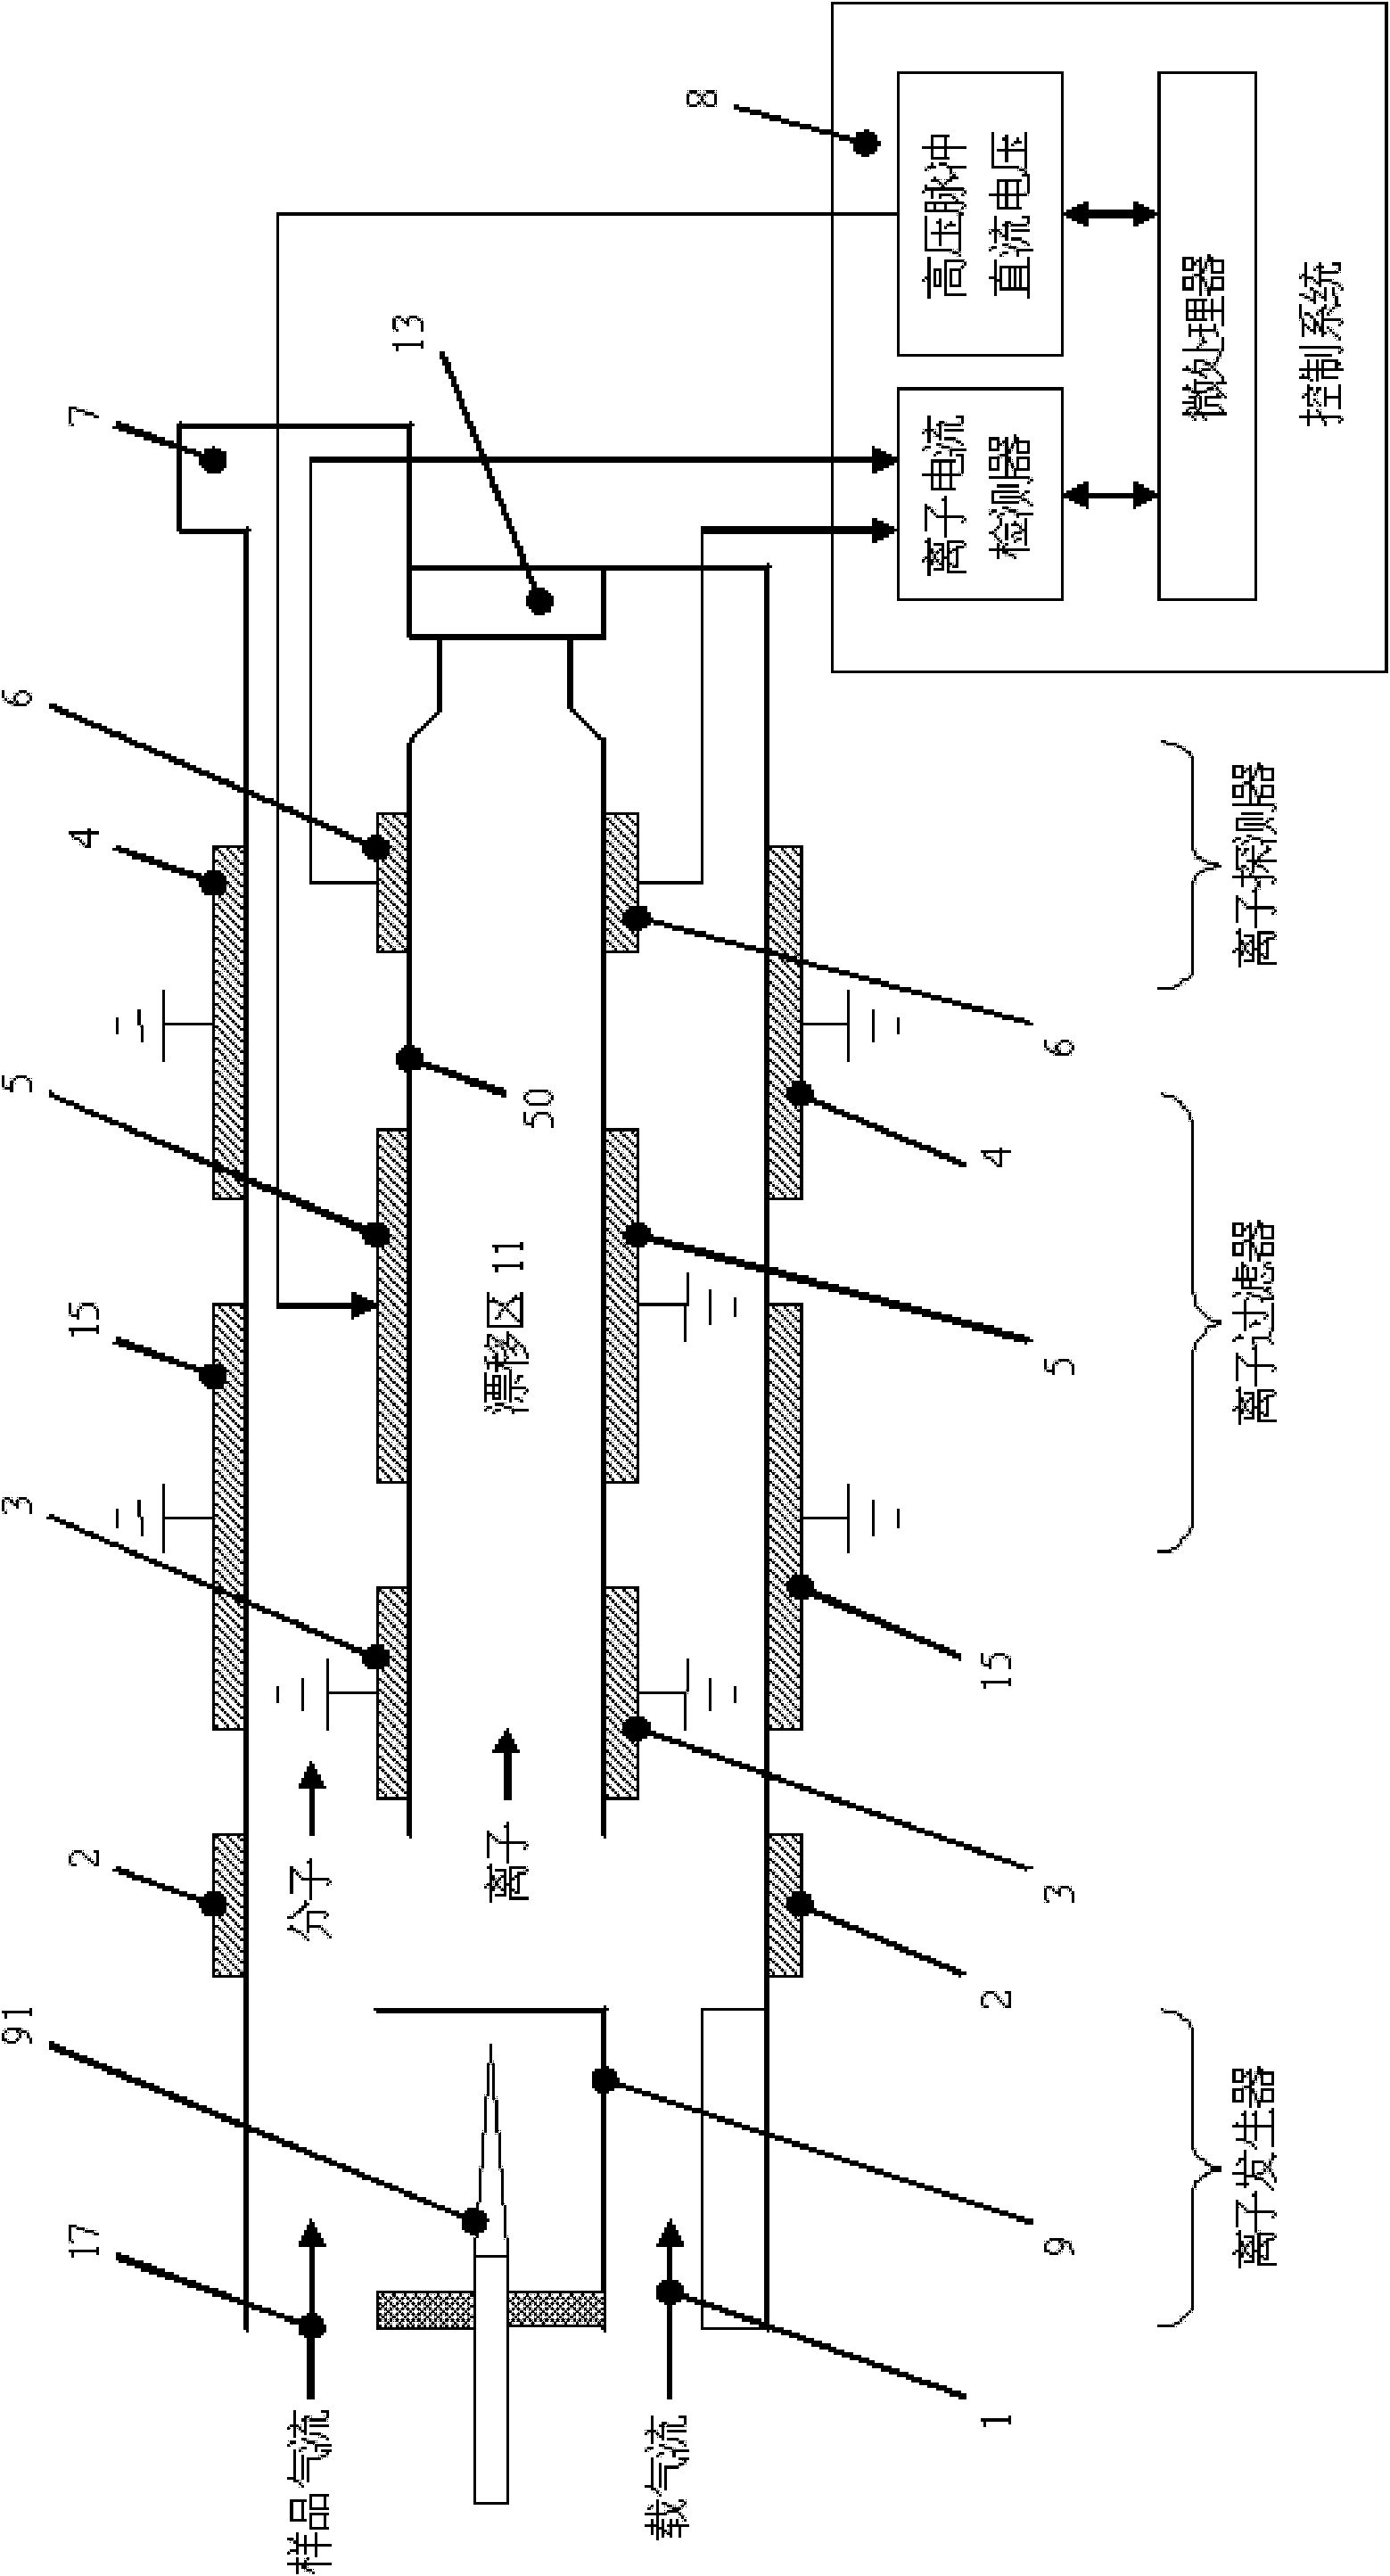 Ionized gas detection device